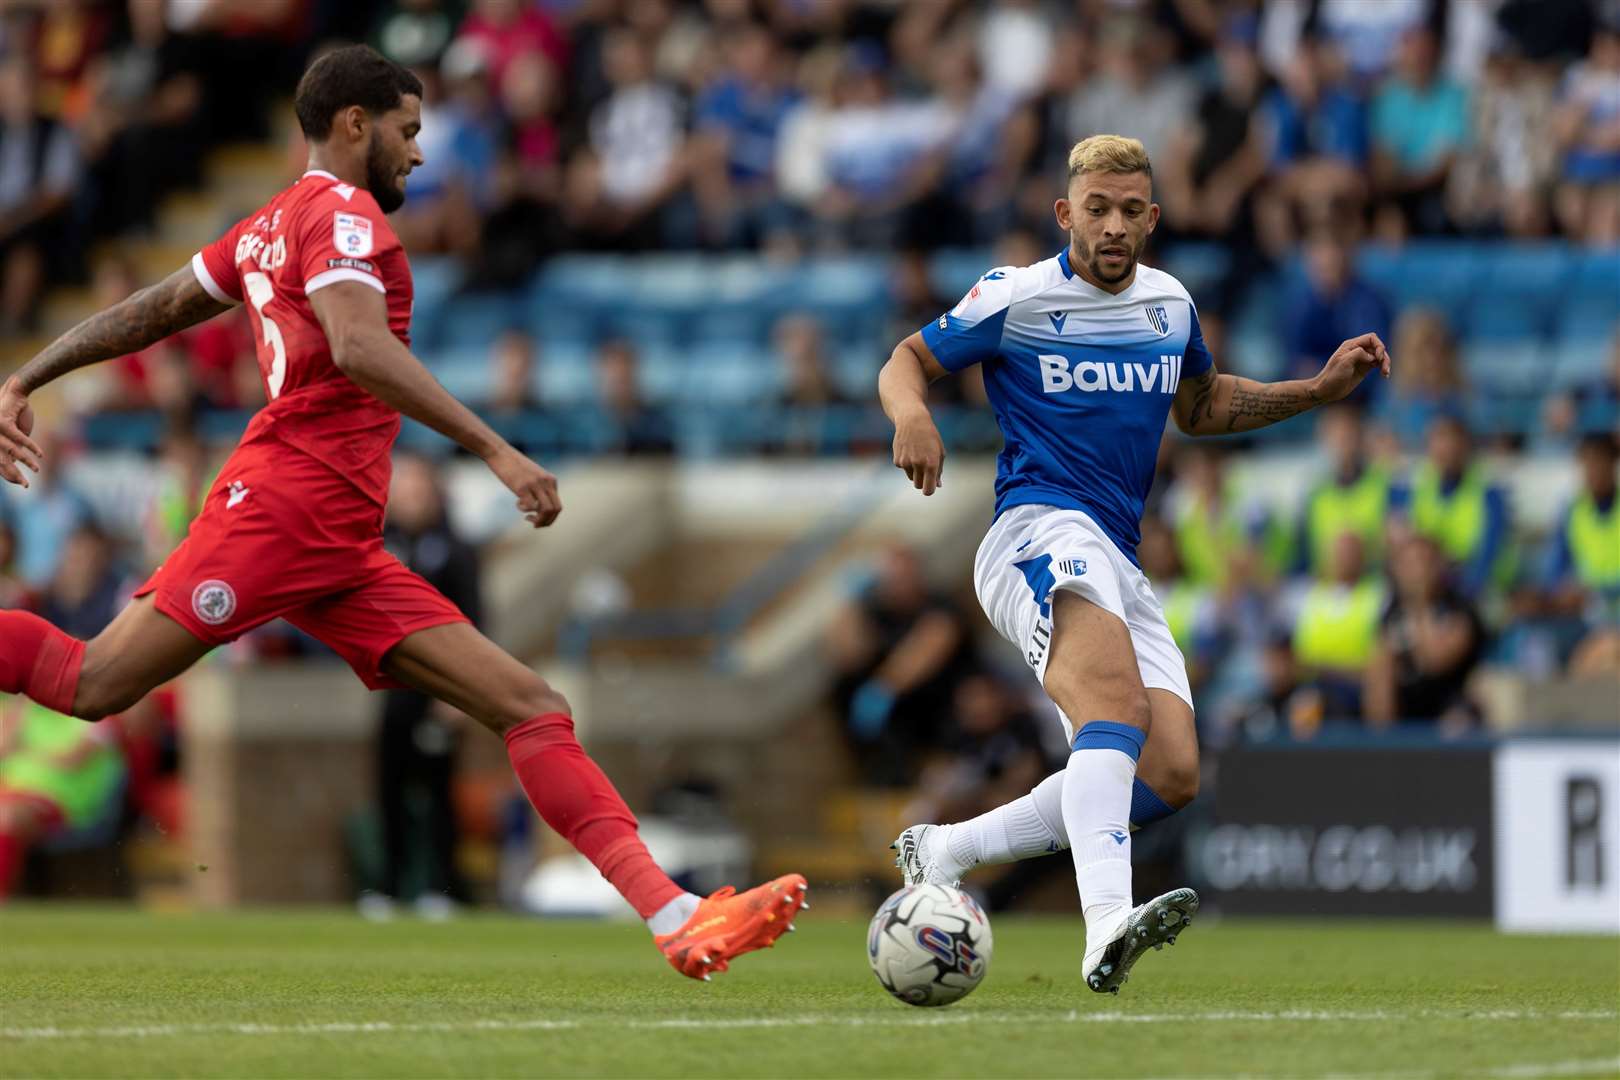 Macauley Bonne made his debut for the Gills after replacing Ashley Nadesan in the 82nd minute Picture: @Julian_KPI